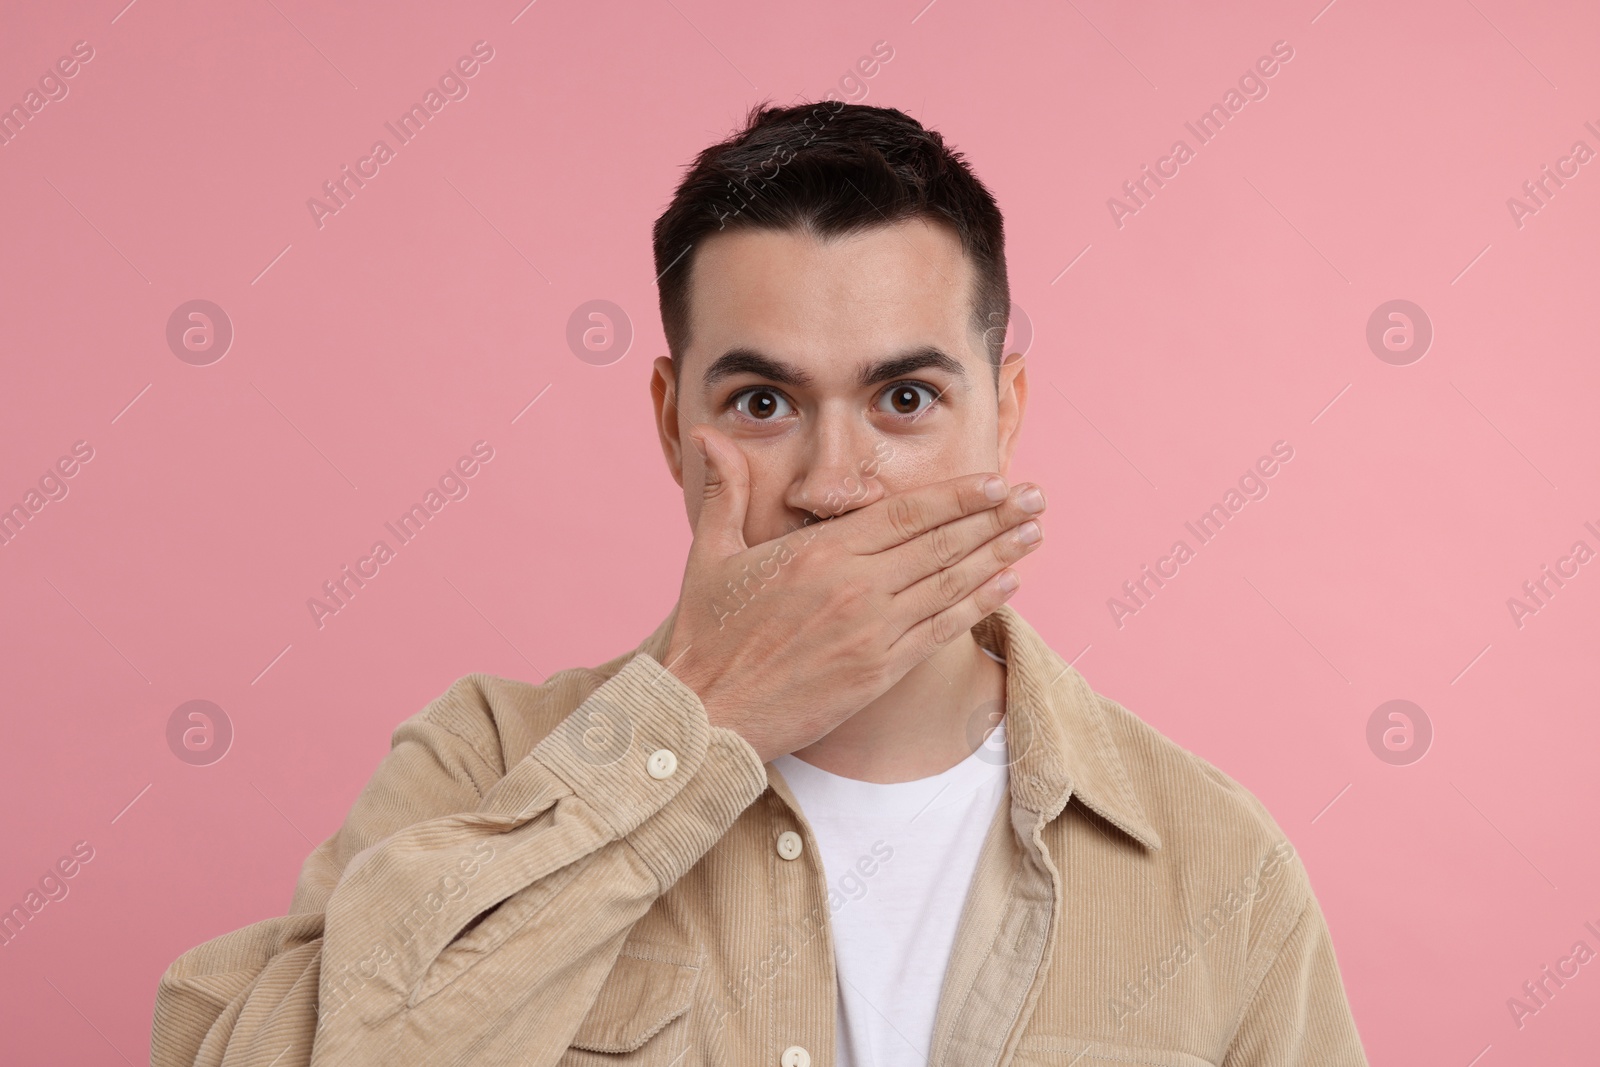 Photo of Embarrassed man covering mouth with hand on pink background